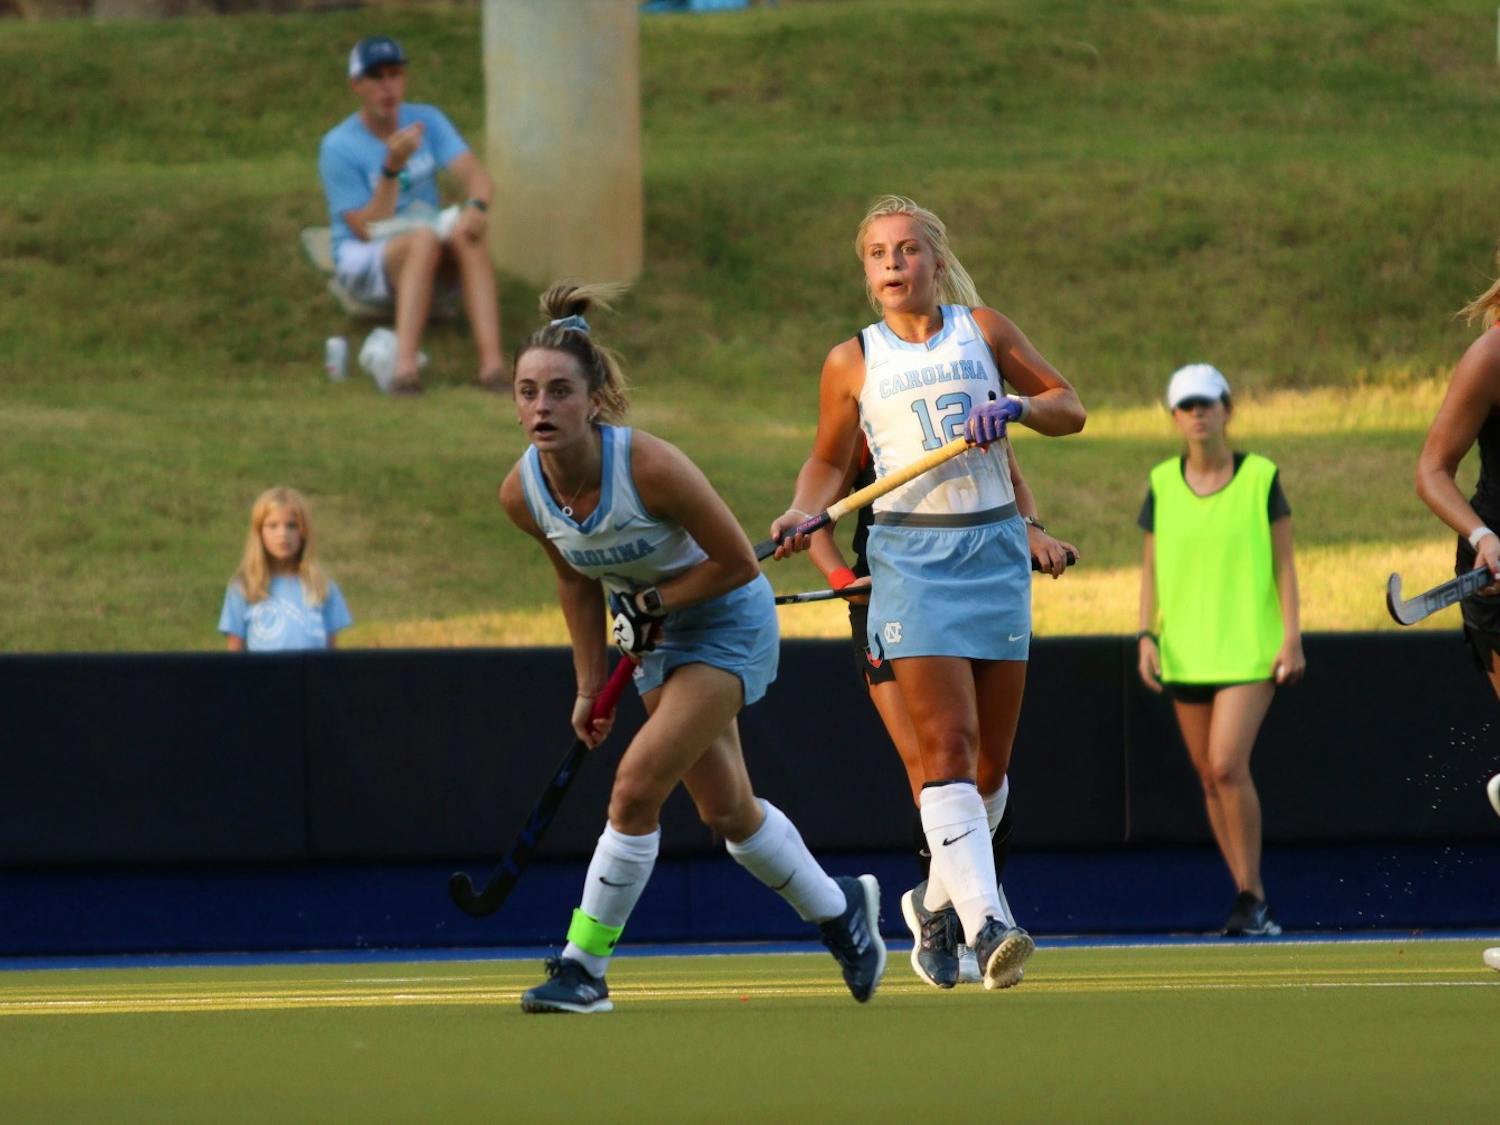 Fifth-year senior forward Erin Matson (1) and first-year forward Ryleigh Heck (12) look towards the Princeton goal. UNC beat Princeton at home 4-3 on Friday, Sept. 2, 2022.